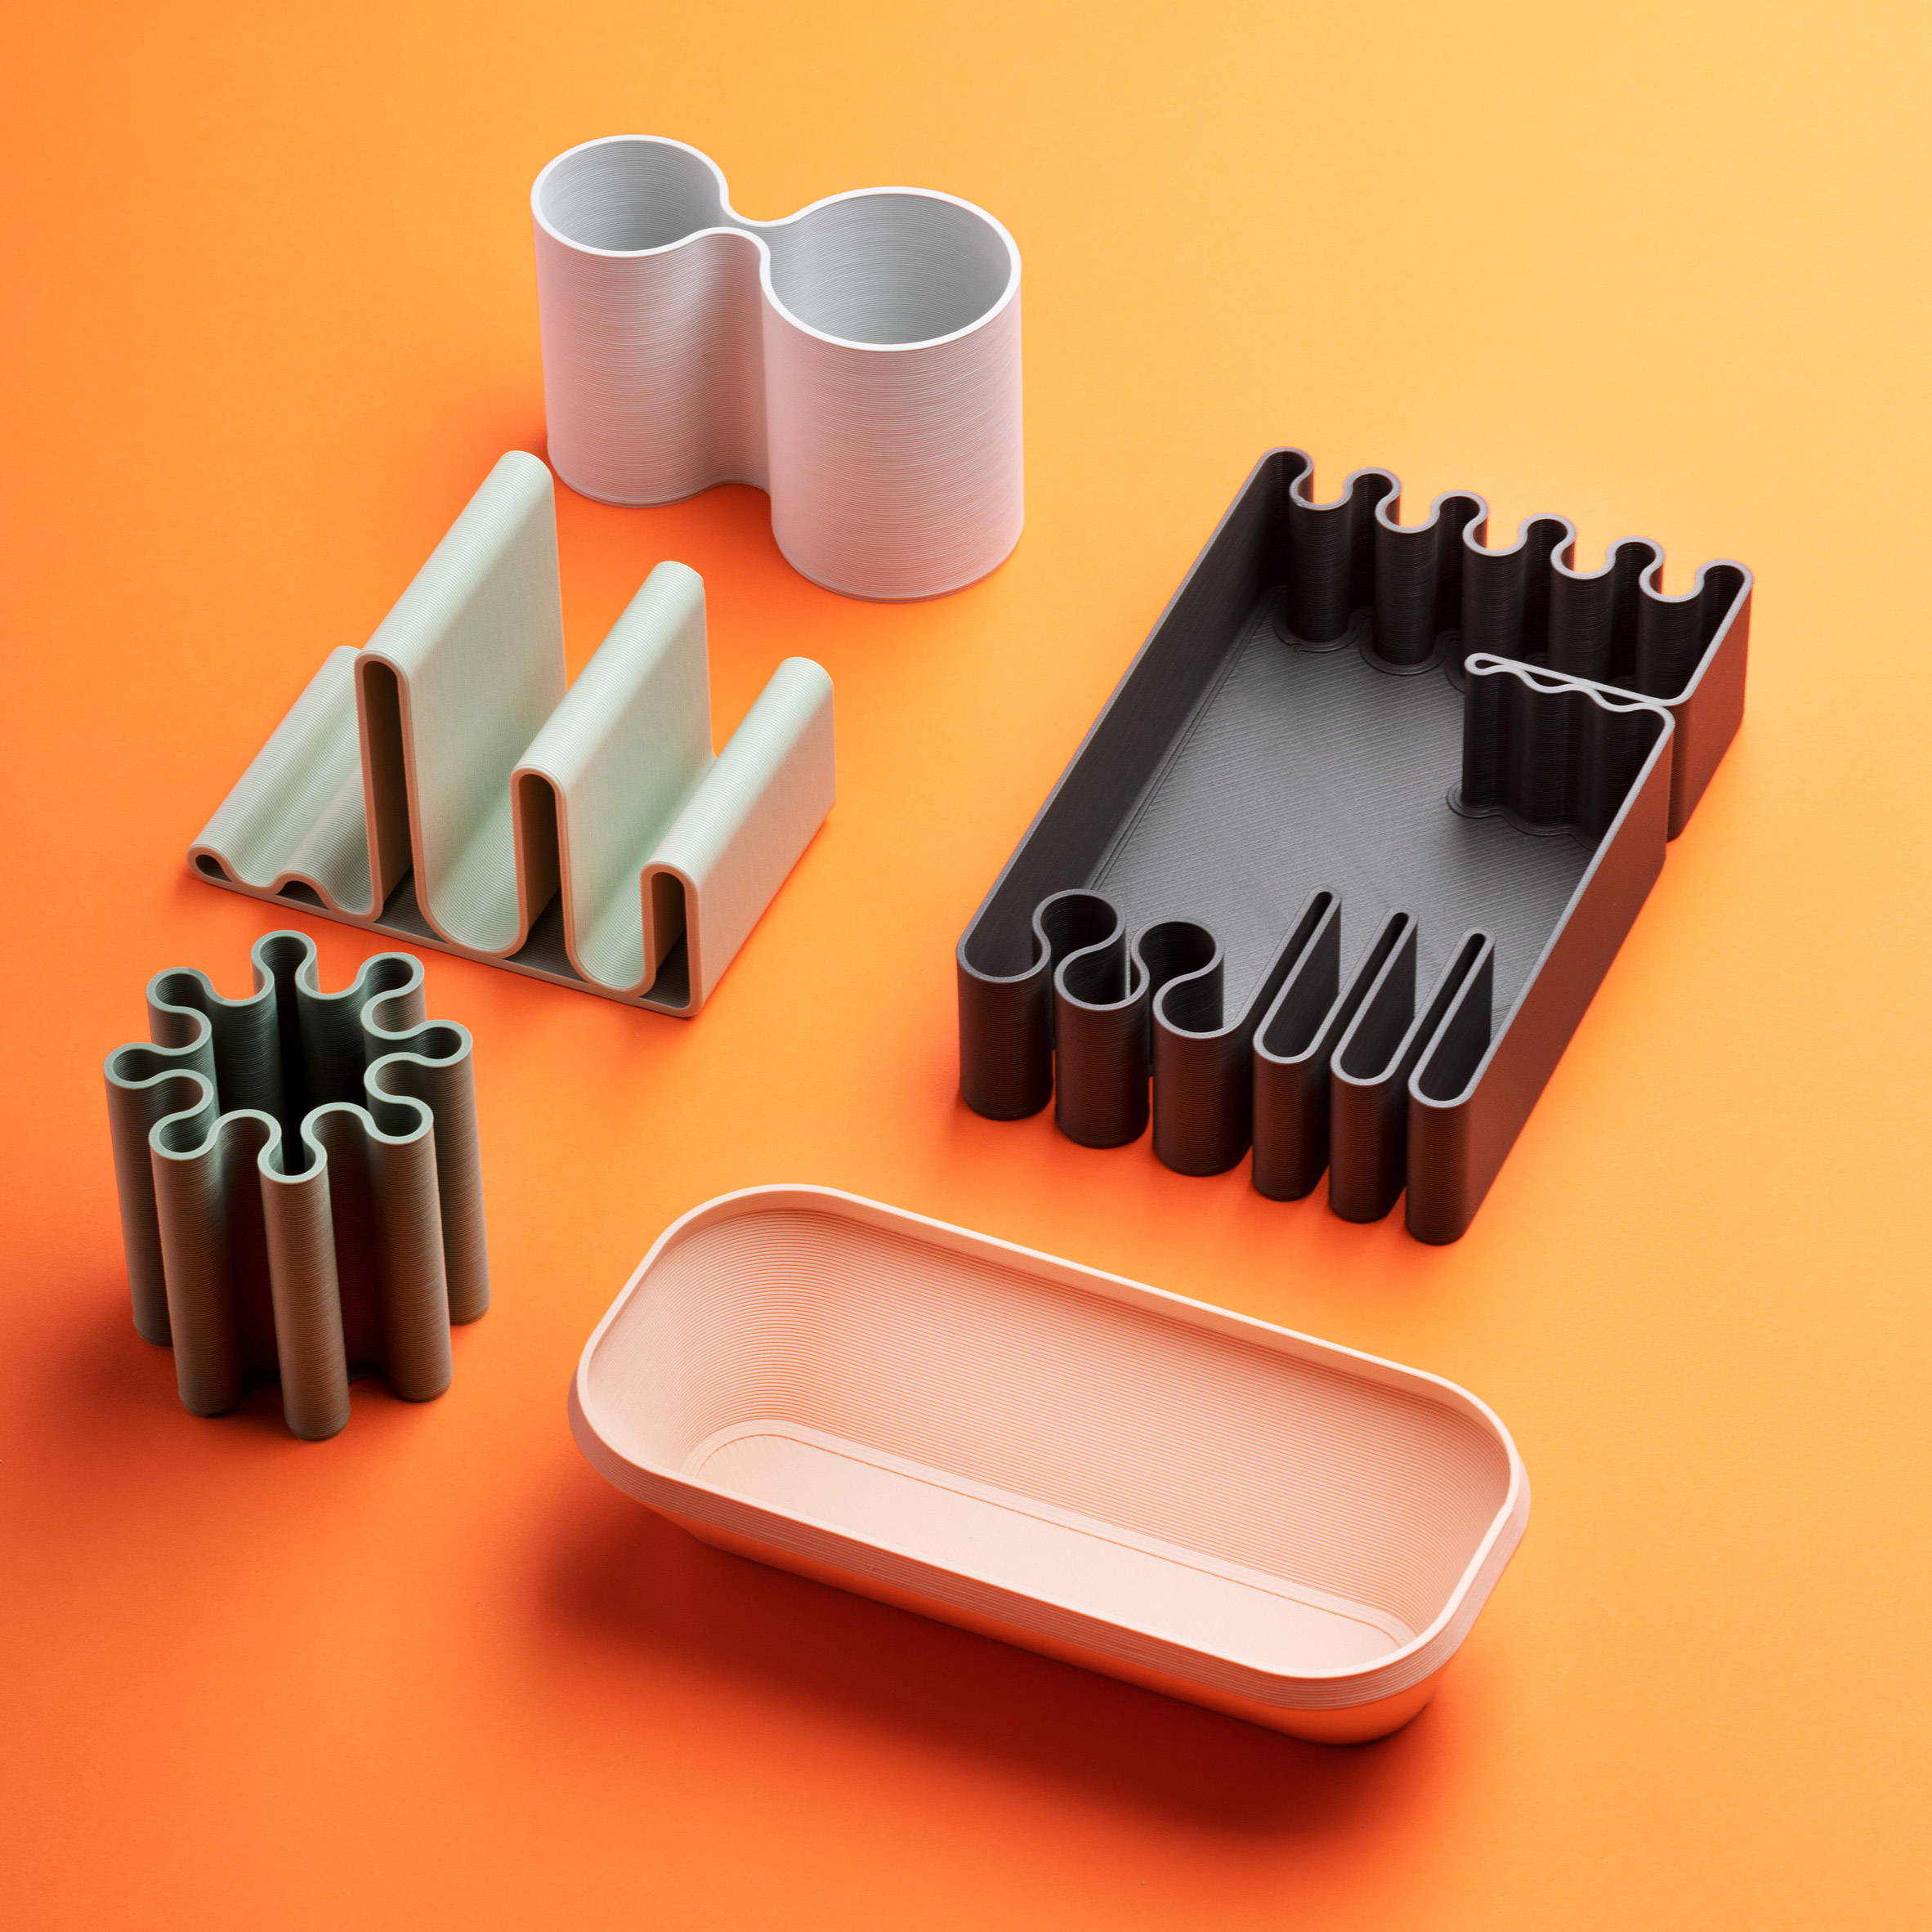 Pearson Lloyd designs desk accessories made from recycled bioplastic